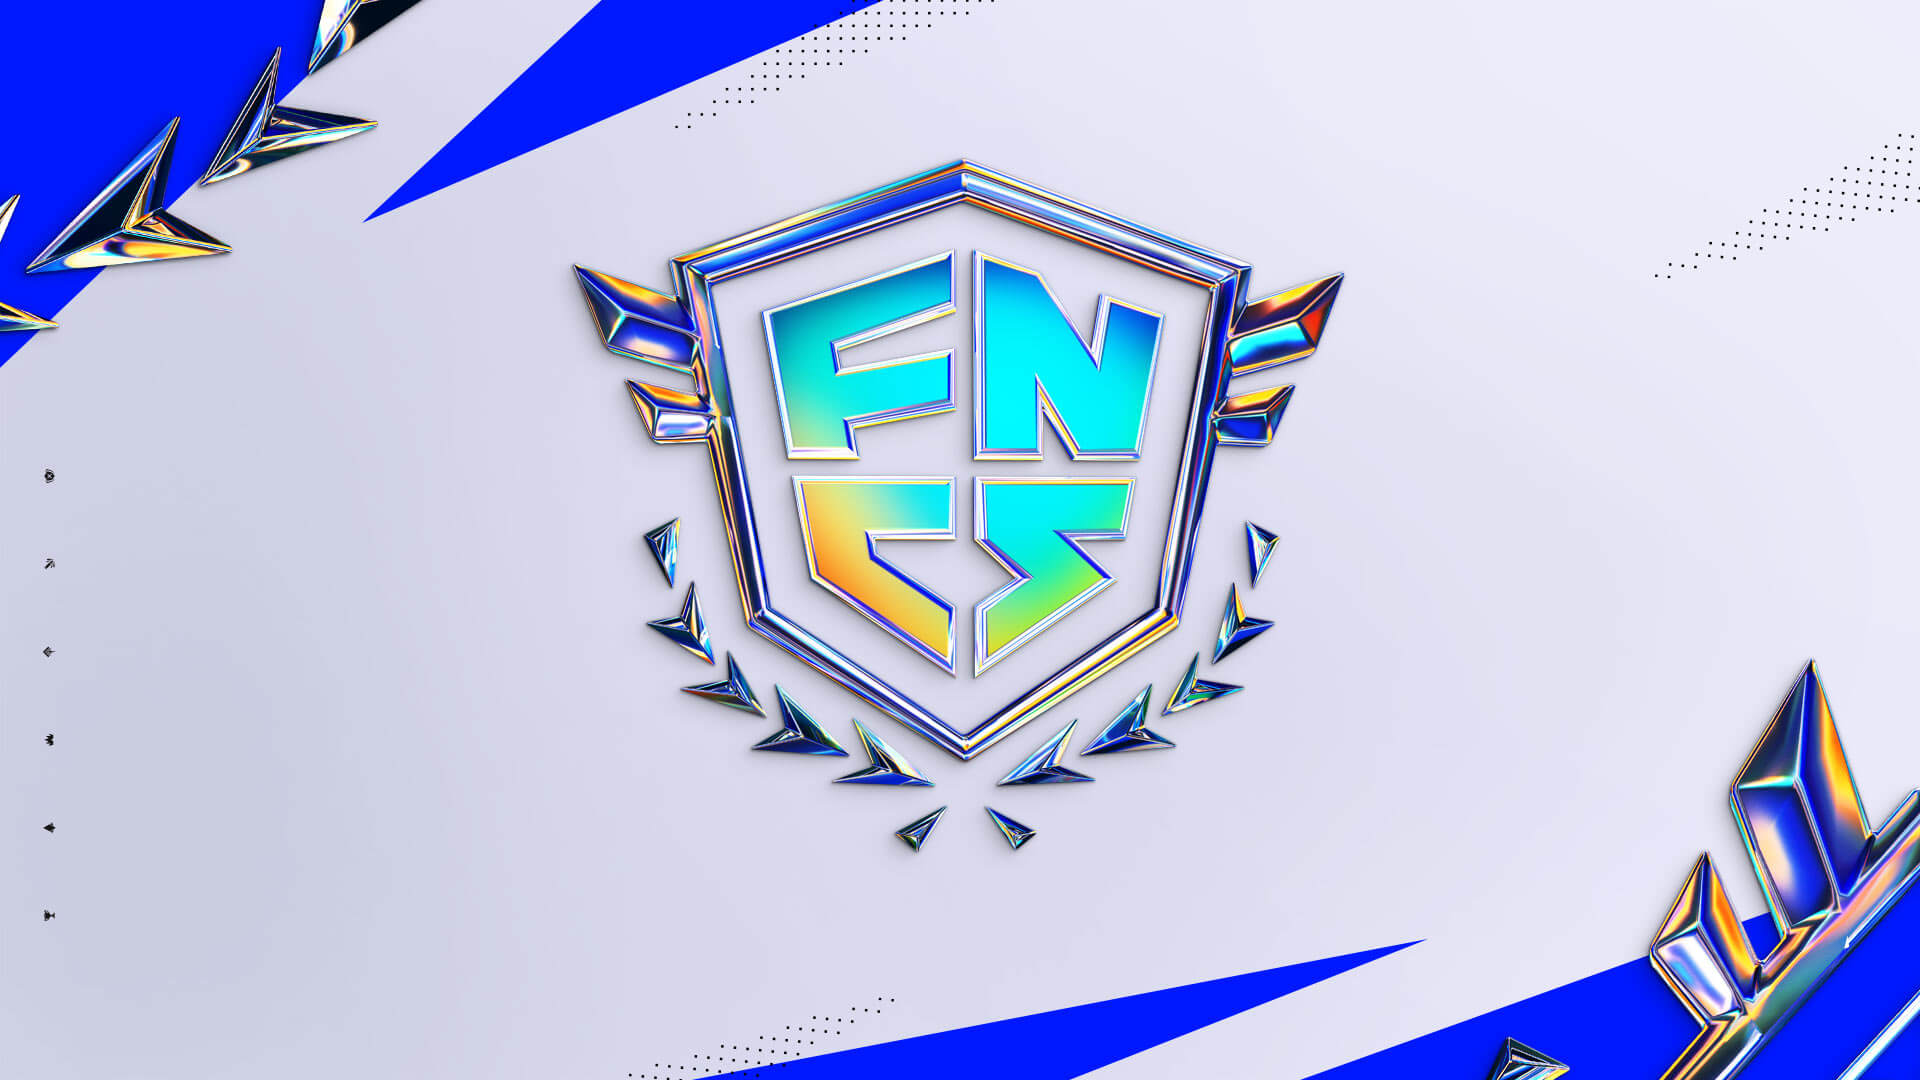 Fortnite Announces FNCS Community Cup with Free Outfit to be Earned